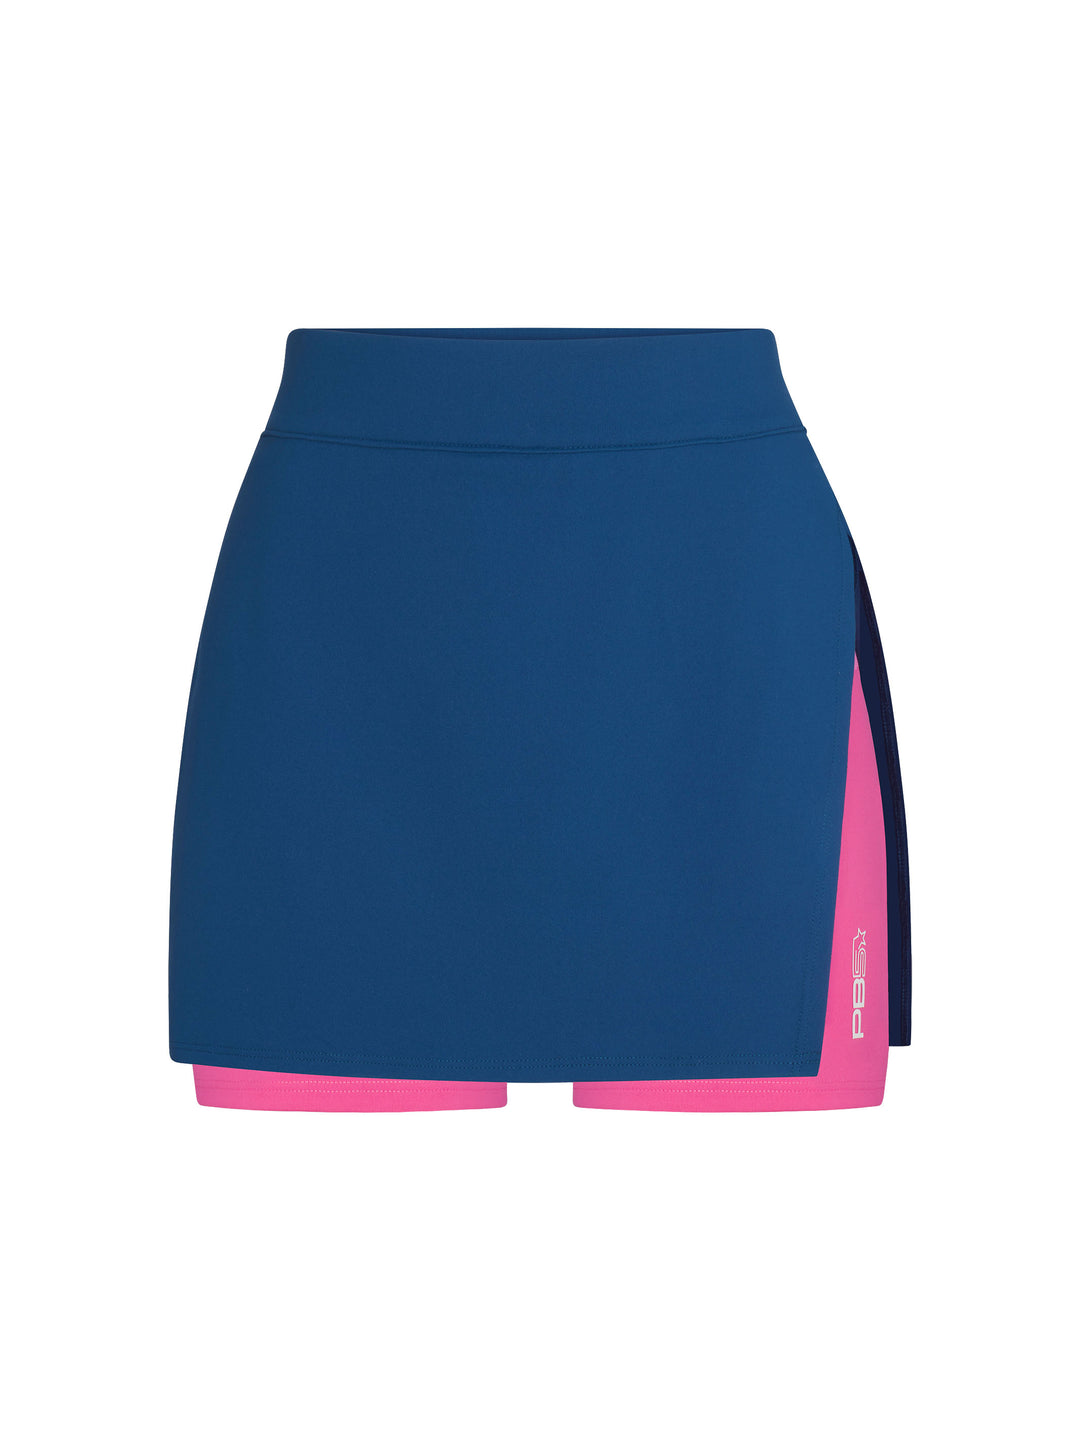 Side Split Skirt front view in astral blue and pink. Small logo on left leg.